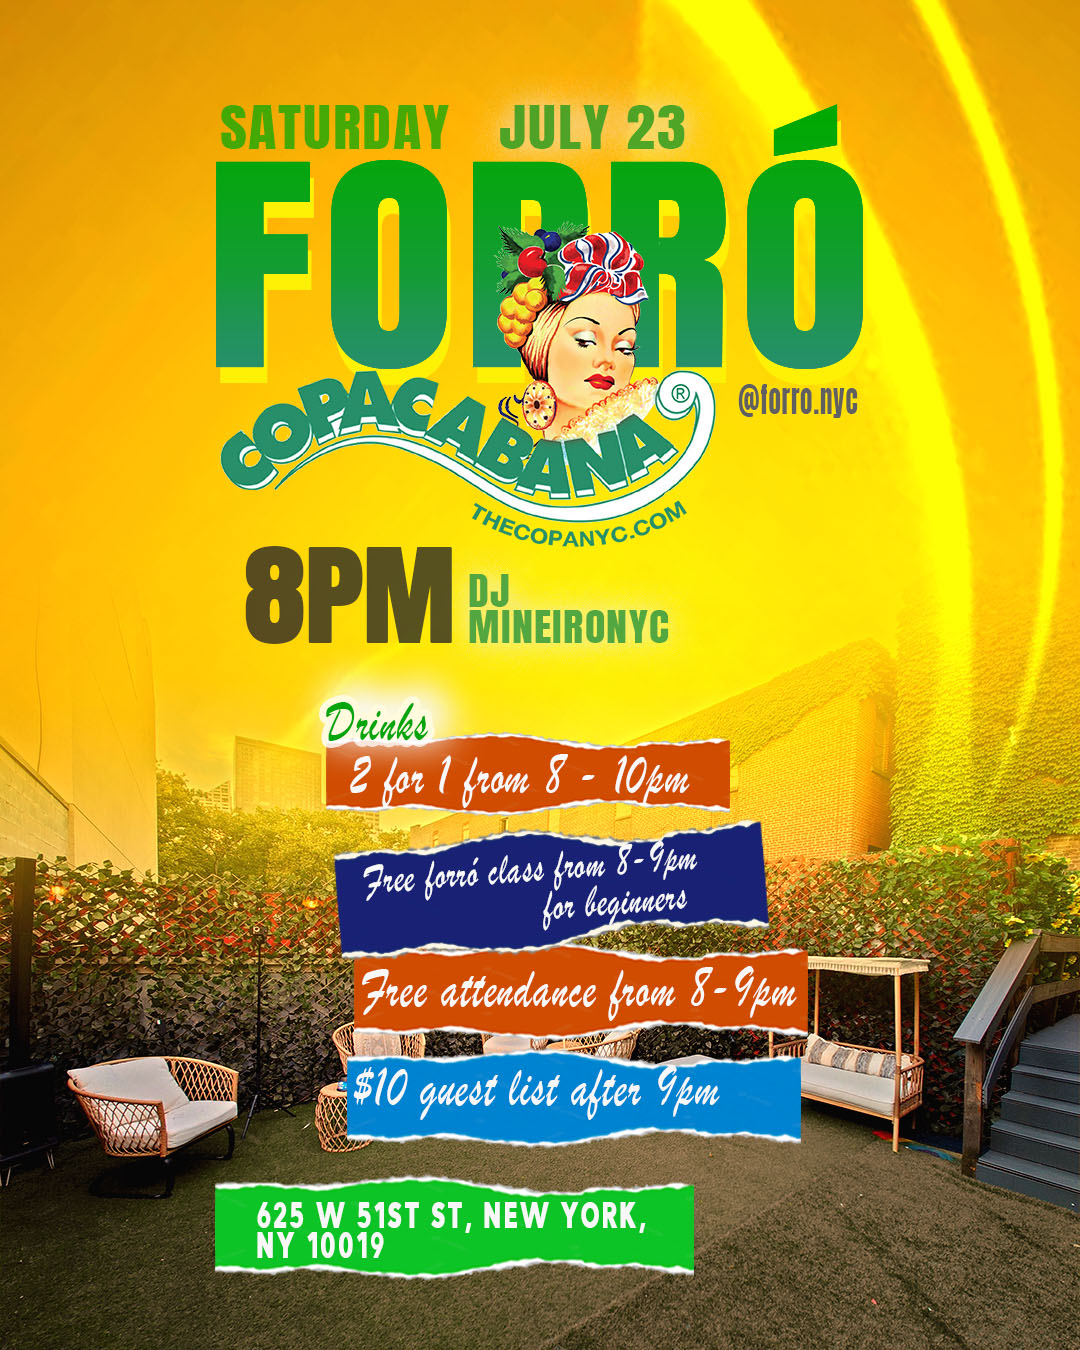 Forró Copacabana, July 23 - 8pm with free forró class